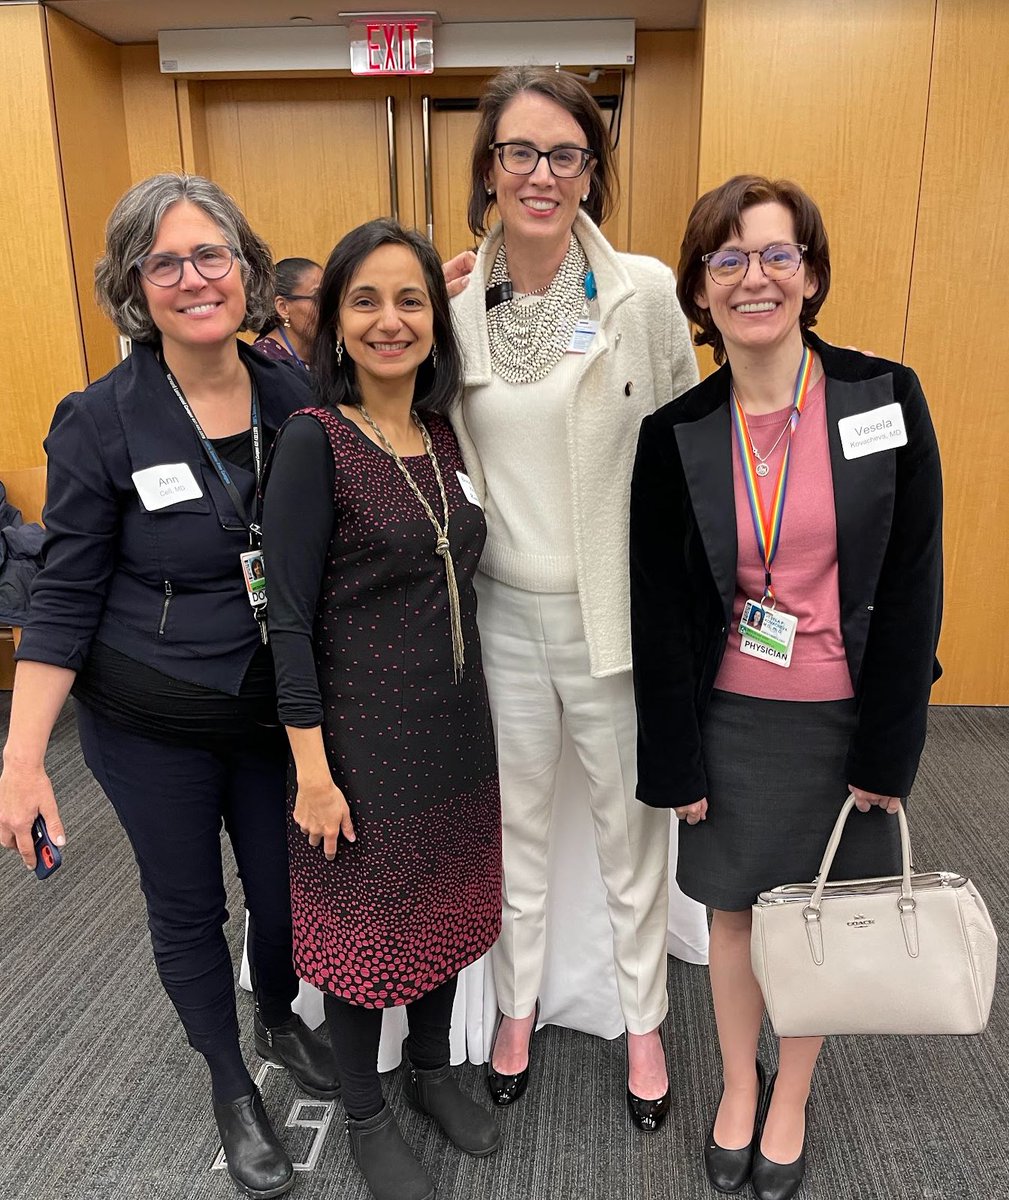 Great connecting with brilliant women #physicians & #scientists leading the way in #AI #research #womeninleadership @BrighamWomens @MassGenBrigham @BrighamResearch #WomenInMedicine @BWHWomensHealth